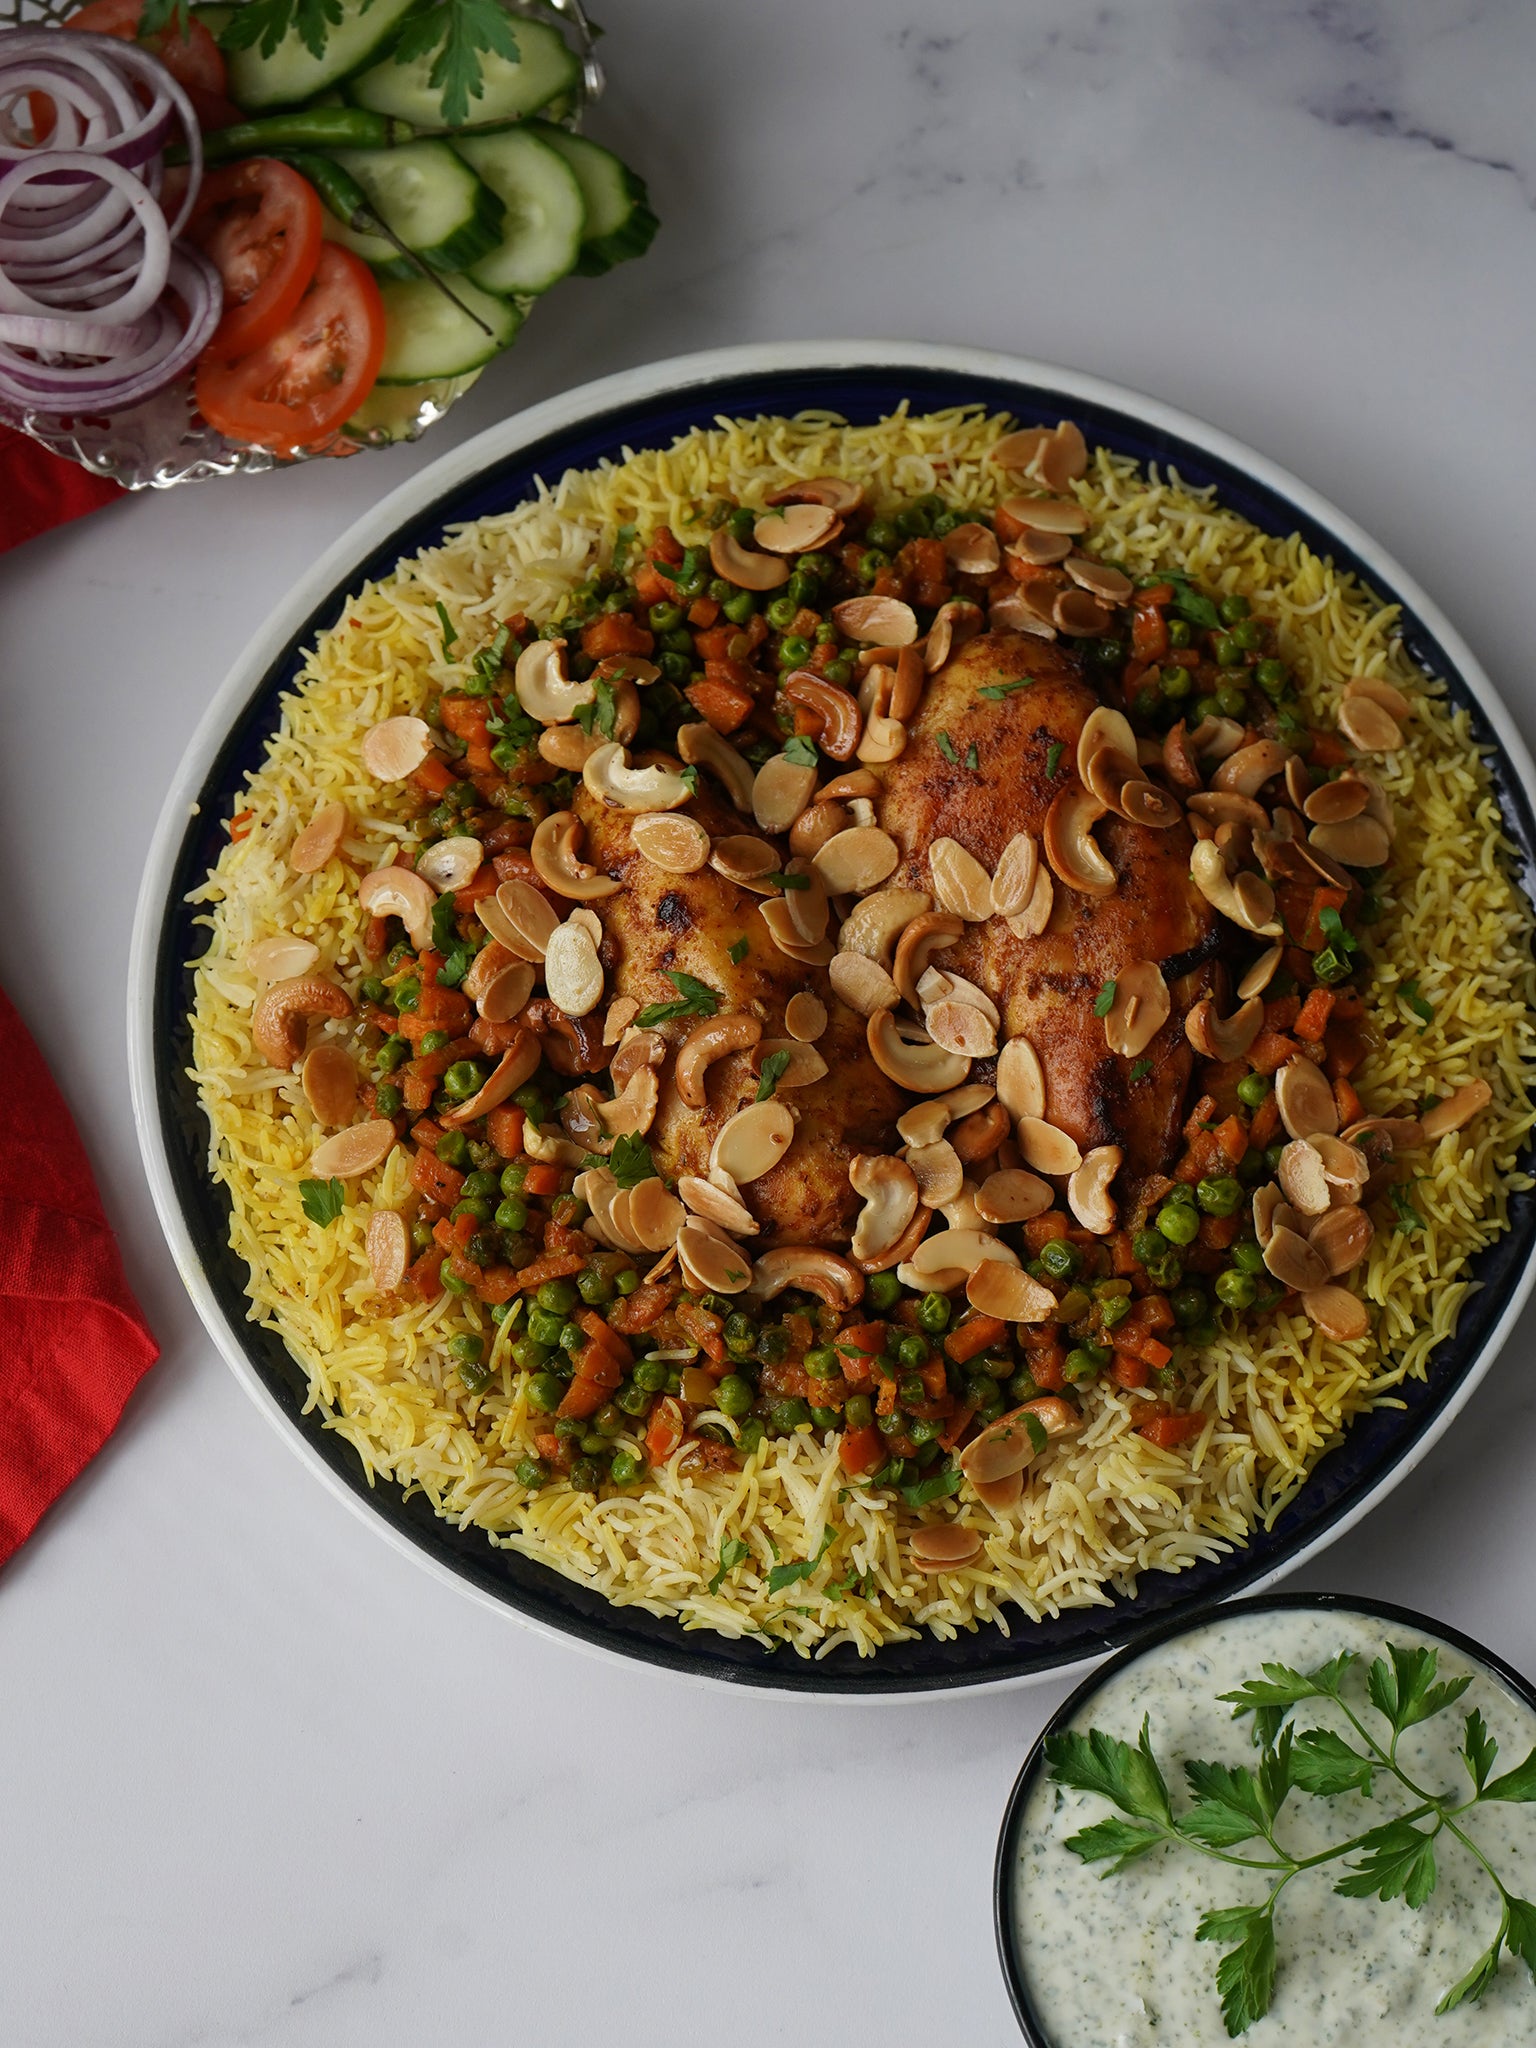 Add a touch of Middle Eastern flair to your Iftar